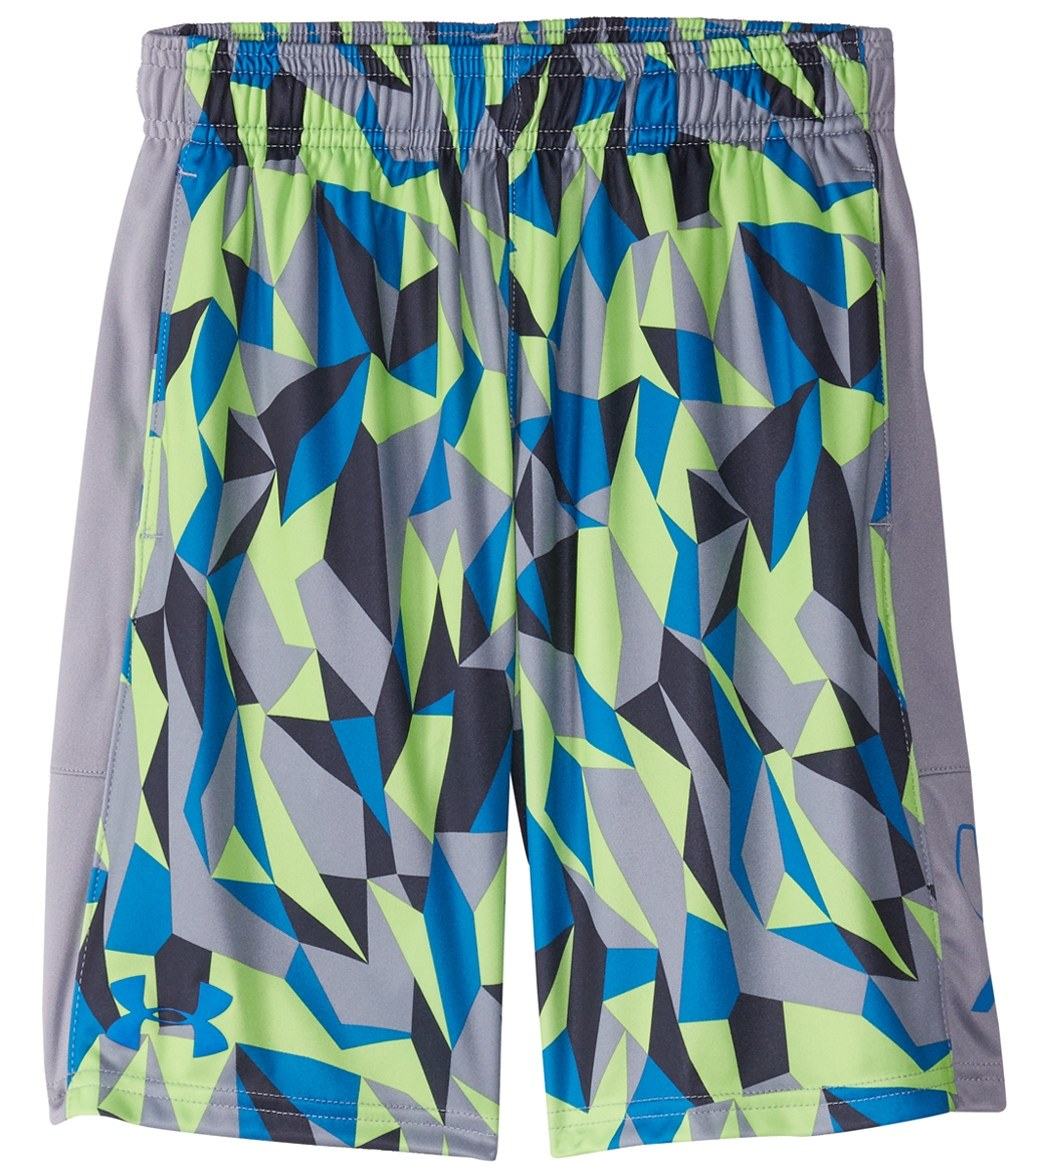 Under Armour Boys' Ua Stunt Printed Short - Quirky Lime-Steel-Cruise Blue X-Small Quirky Lime/Steel/Cruise Blue Polyester - Swimoutlet.com